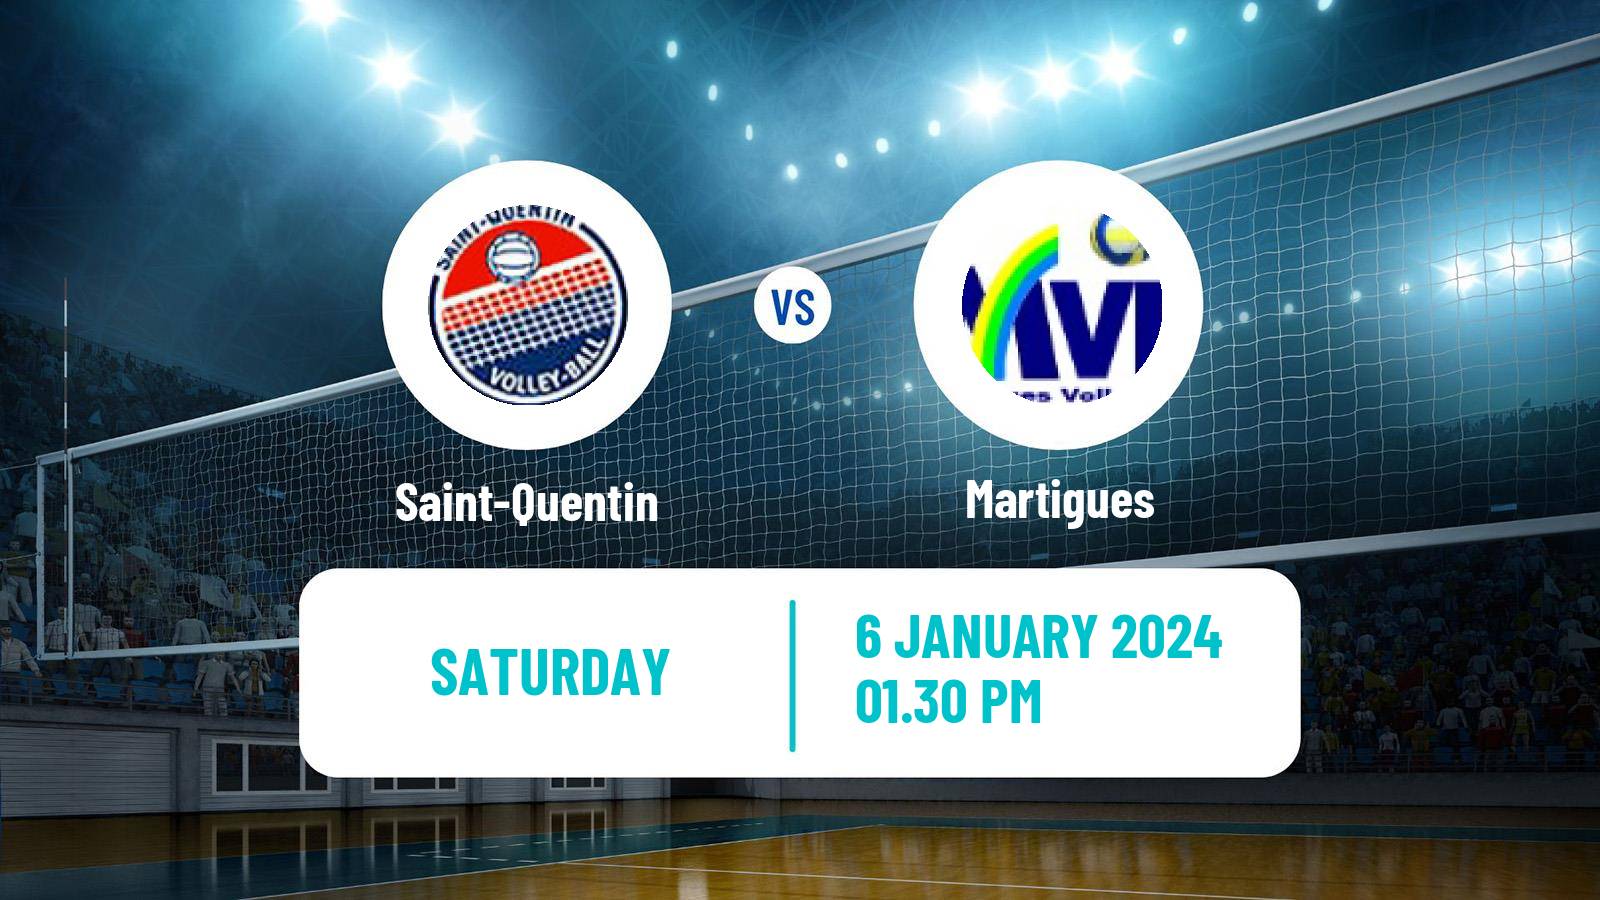 Volleyball French Ligue B Volleyball Saint-Quentin - Martigues